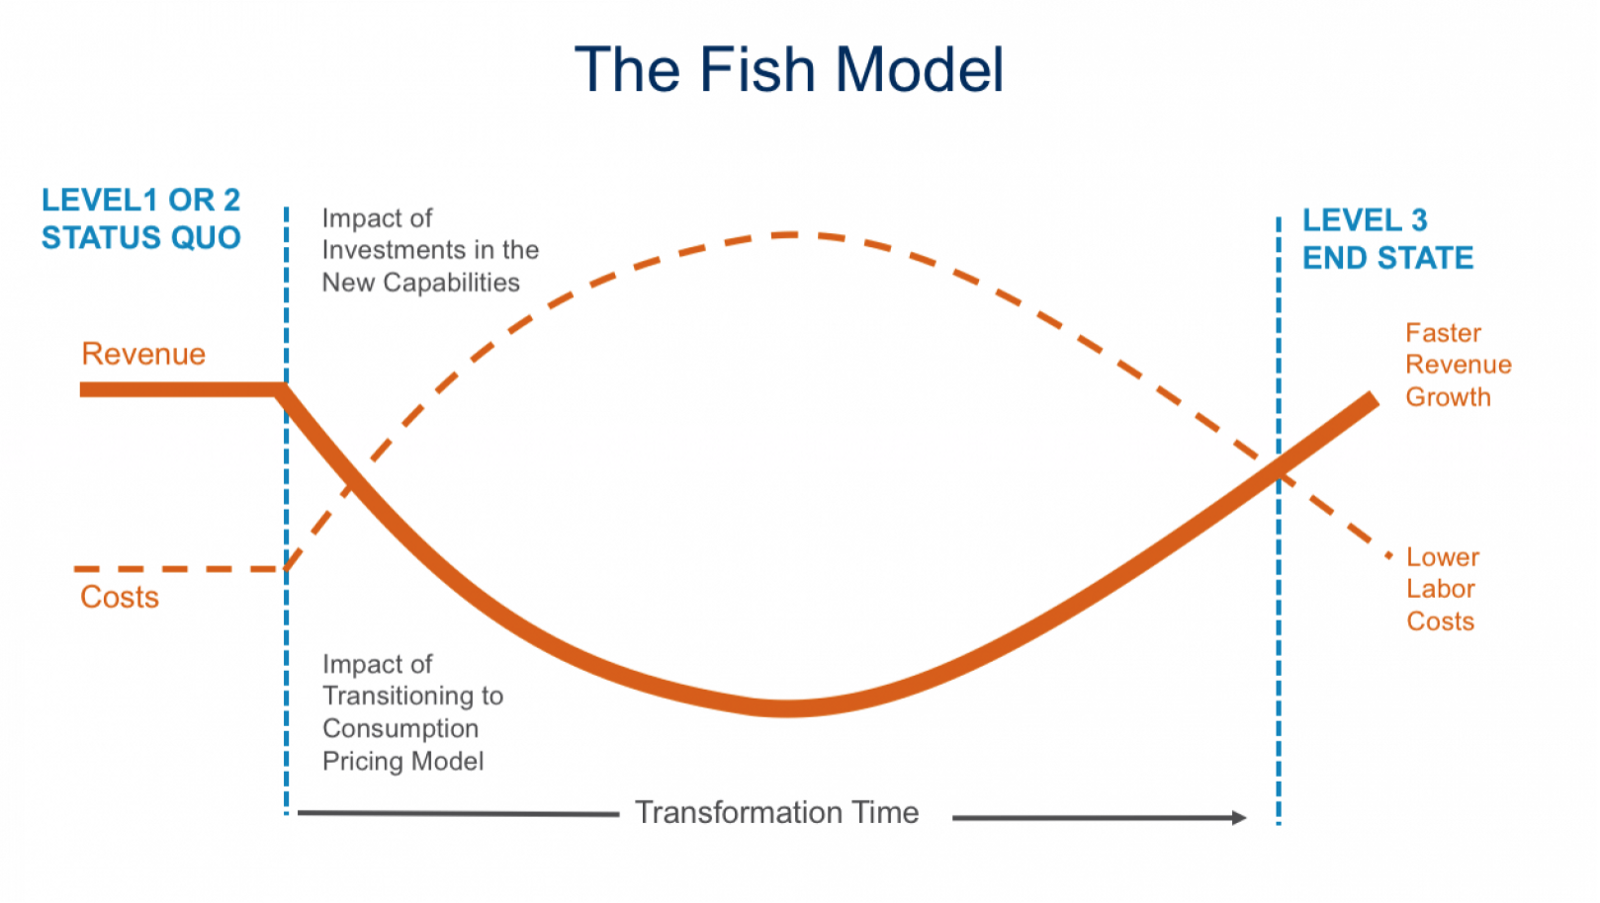 https://inplayer.com/wp-content/uploads/2018/09/the-fish-model.png